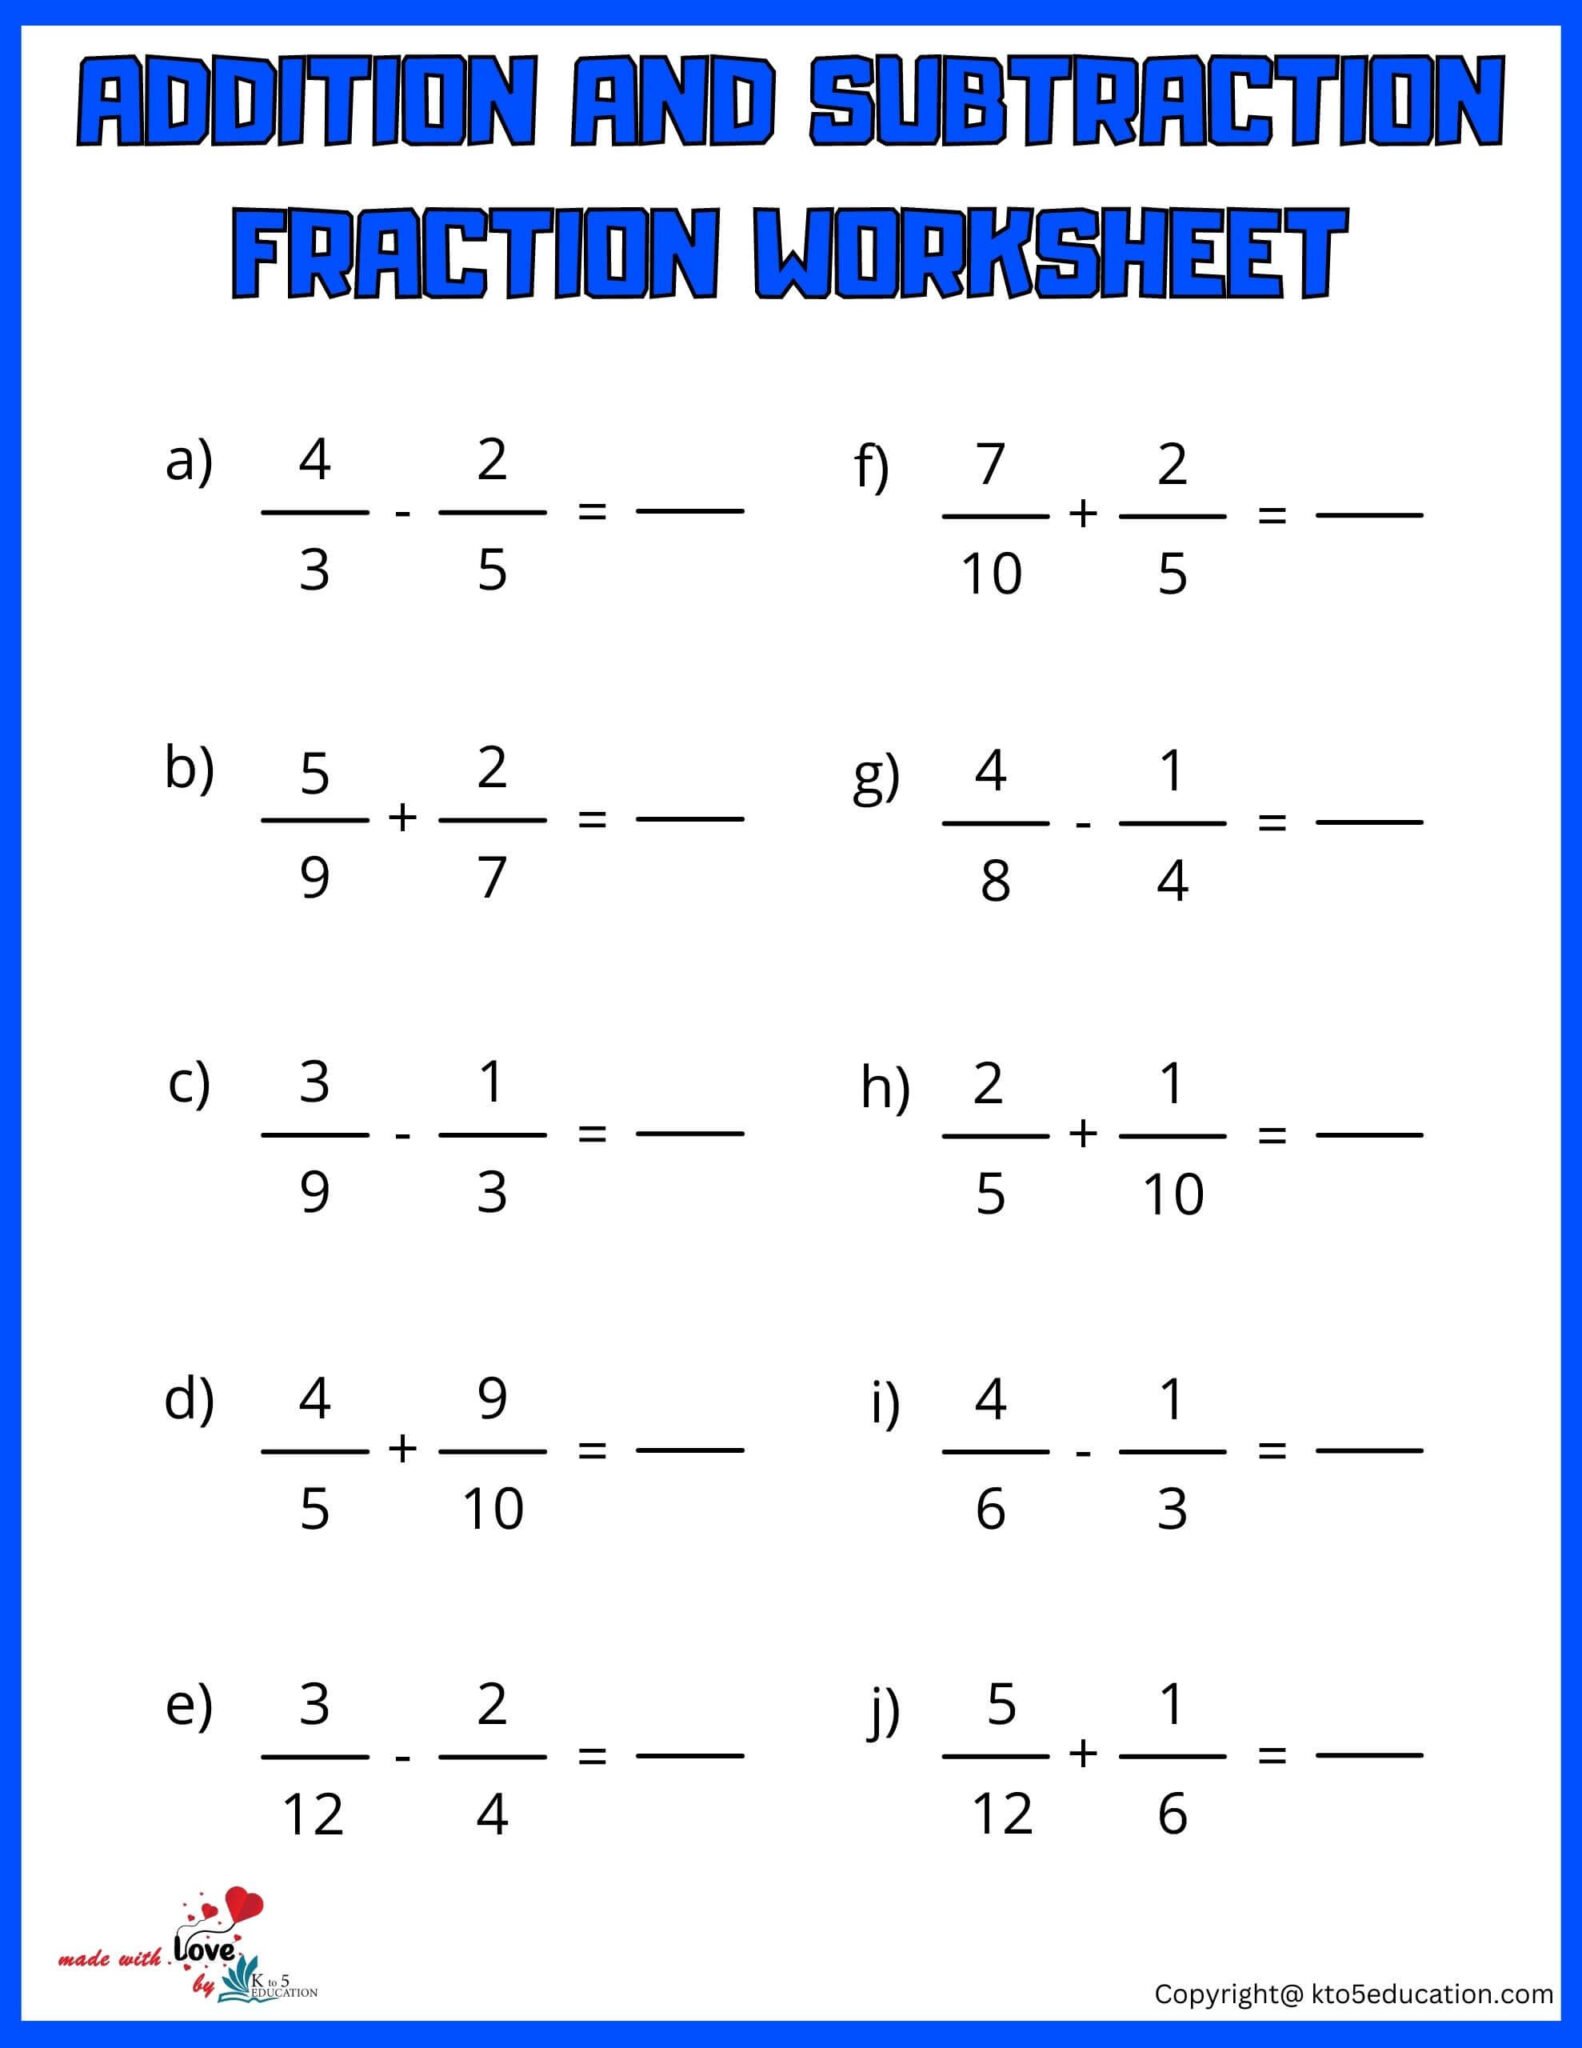 addition-and-subtraction-fraction-worksheet-free